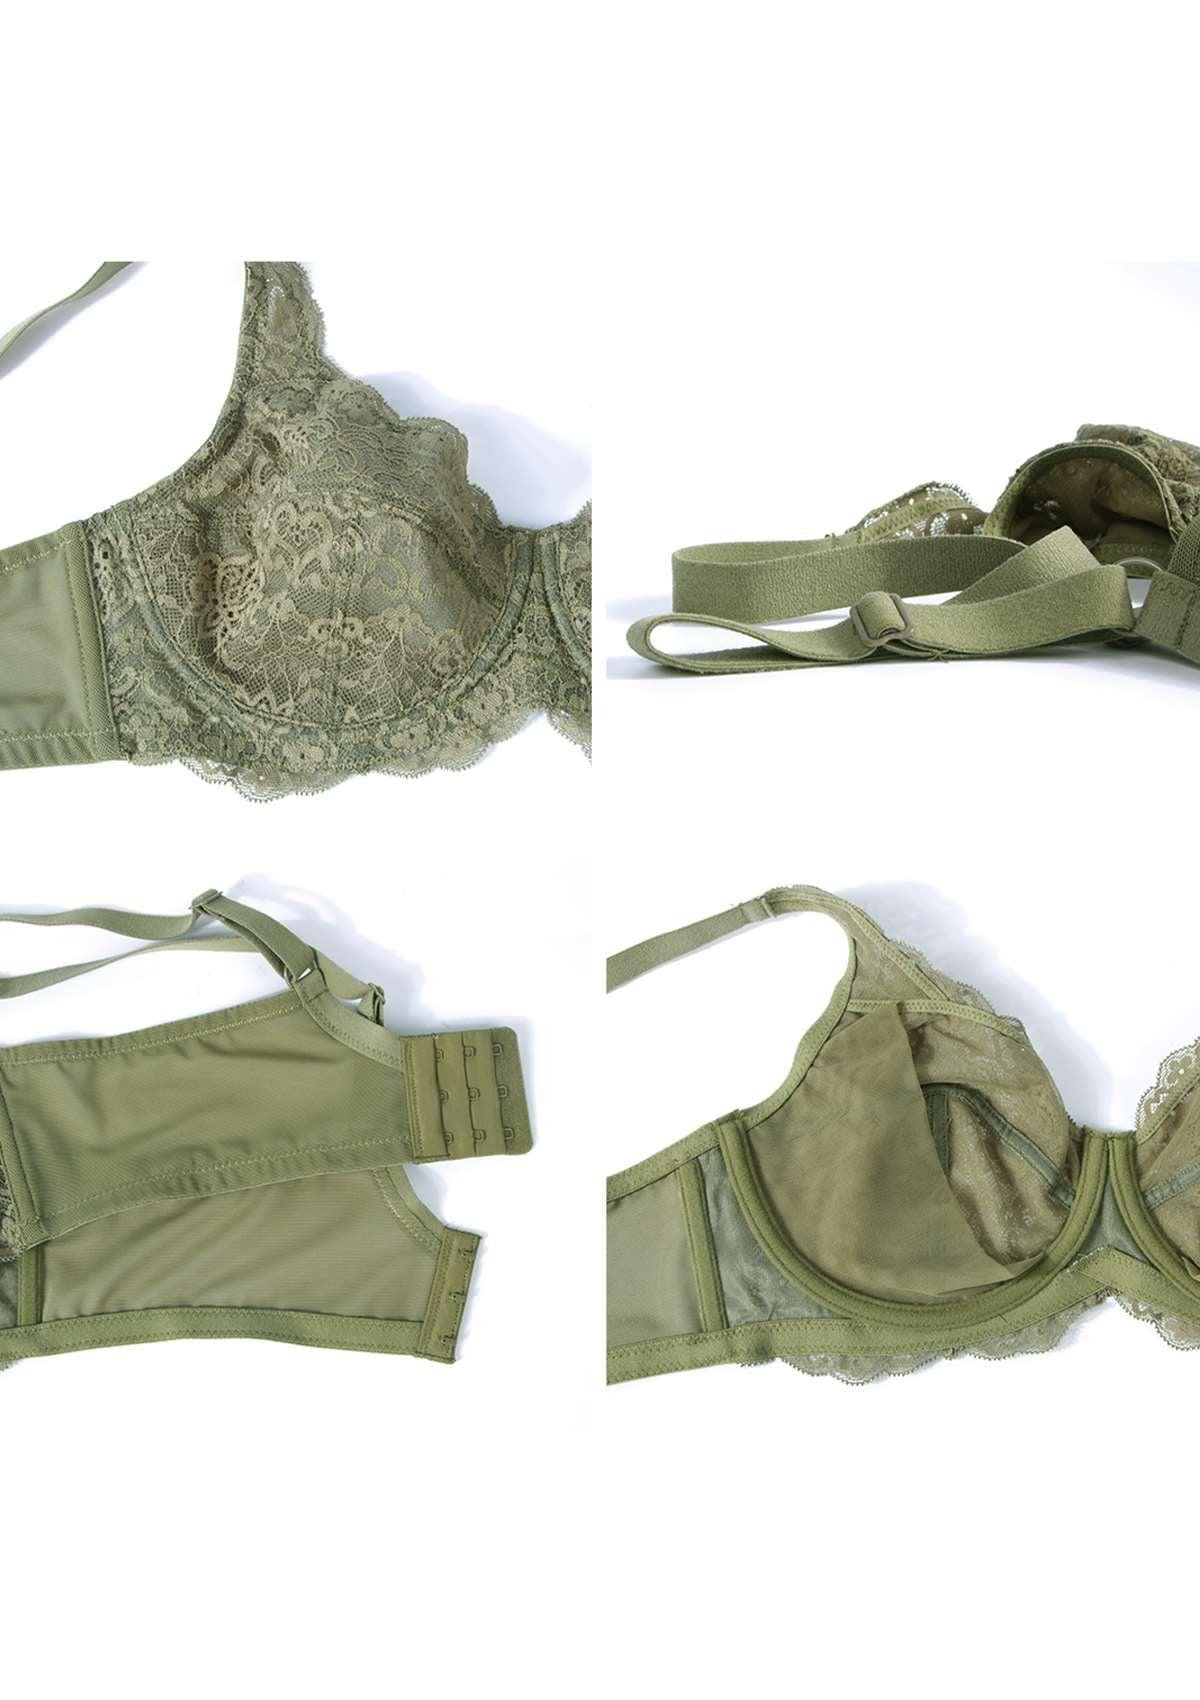 HSIA All-Over Floral Lace Unlined Bra: Minimizer Bra For Heavy Breasts - Dark Green / 44 / DDD/F